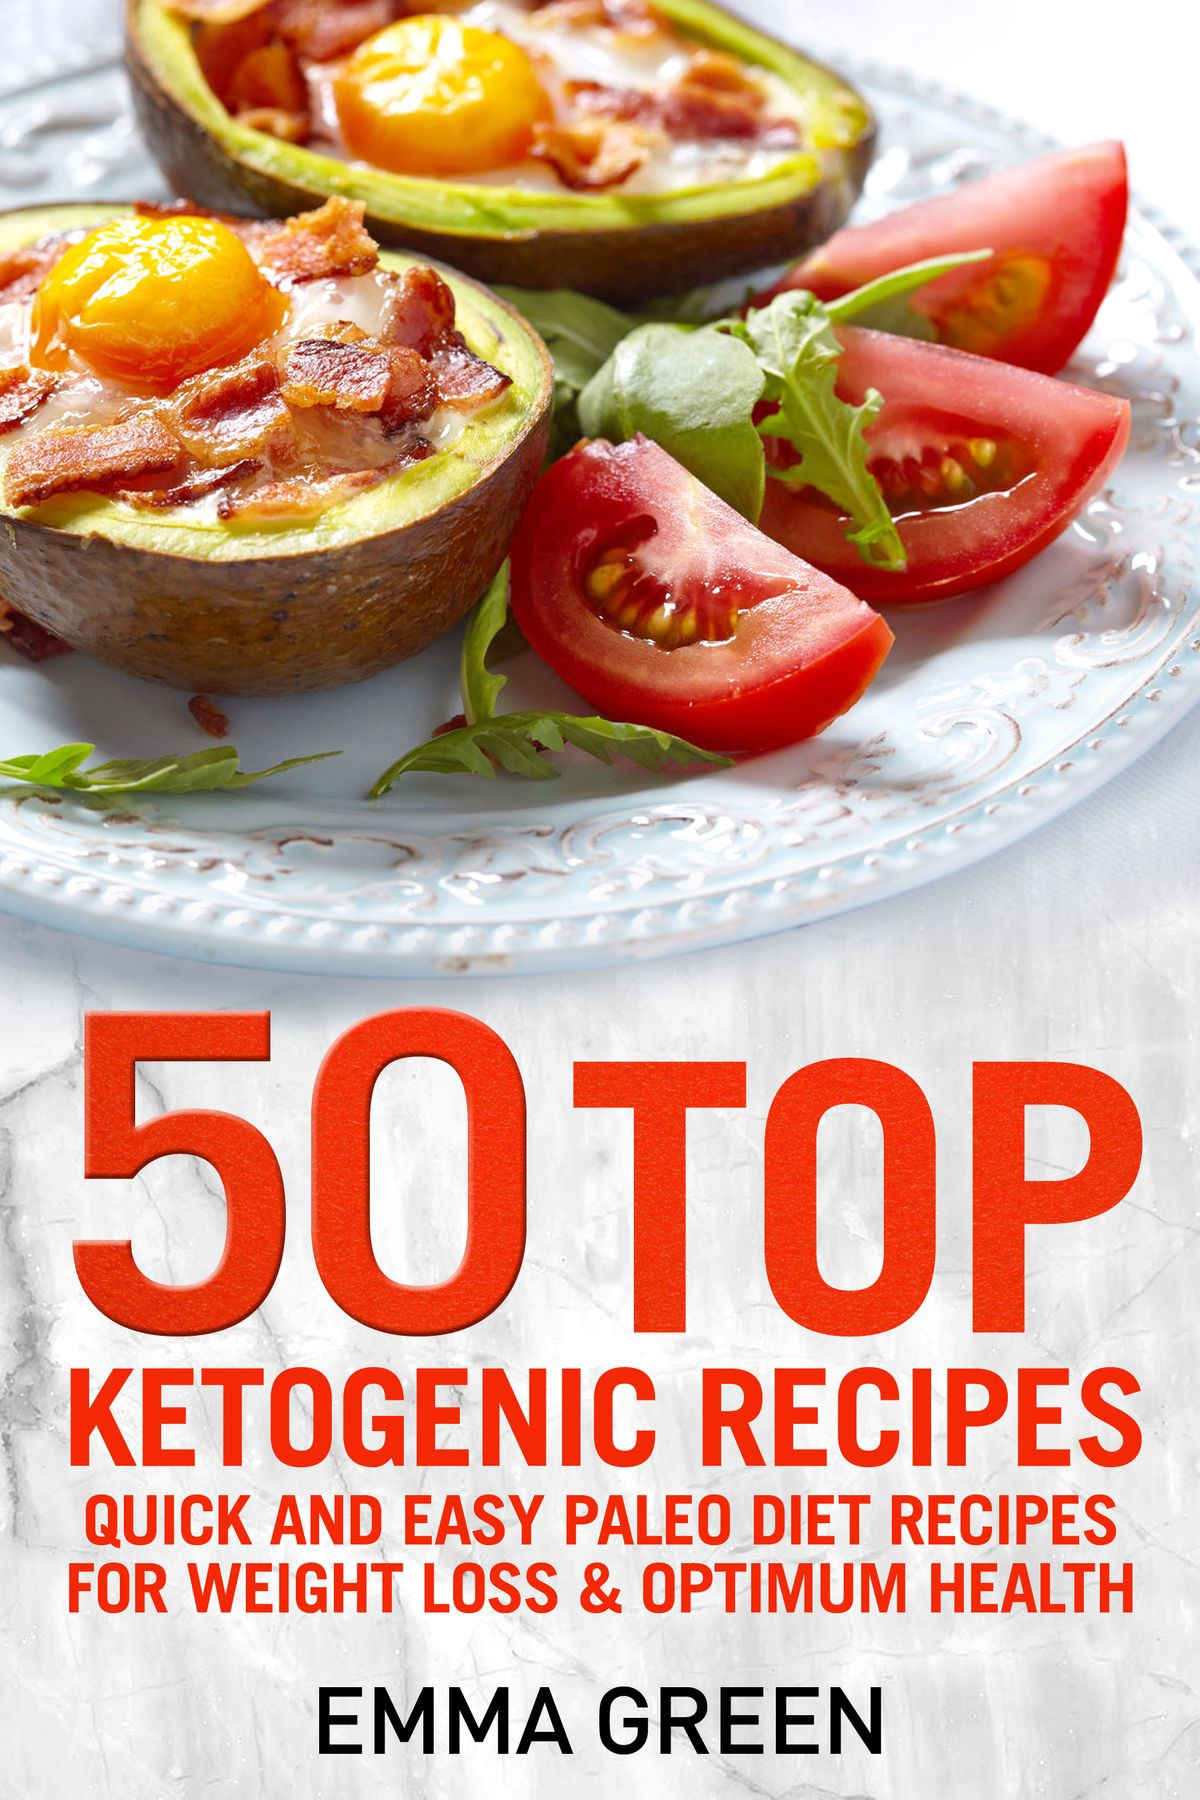 Ketogenic Diet Recipes Weight Loss
 50 Top Ketogenic Recipes Quick and Easy Keto Diet Recipes